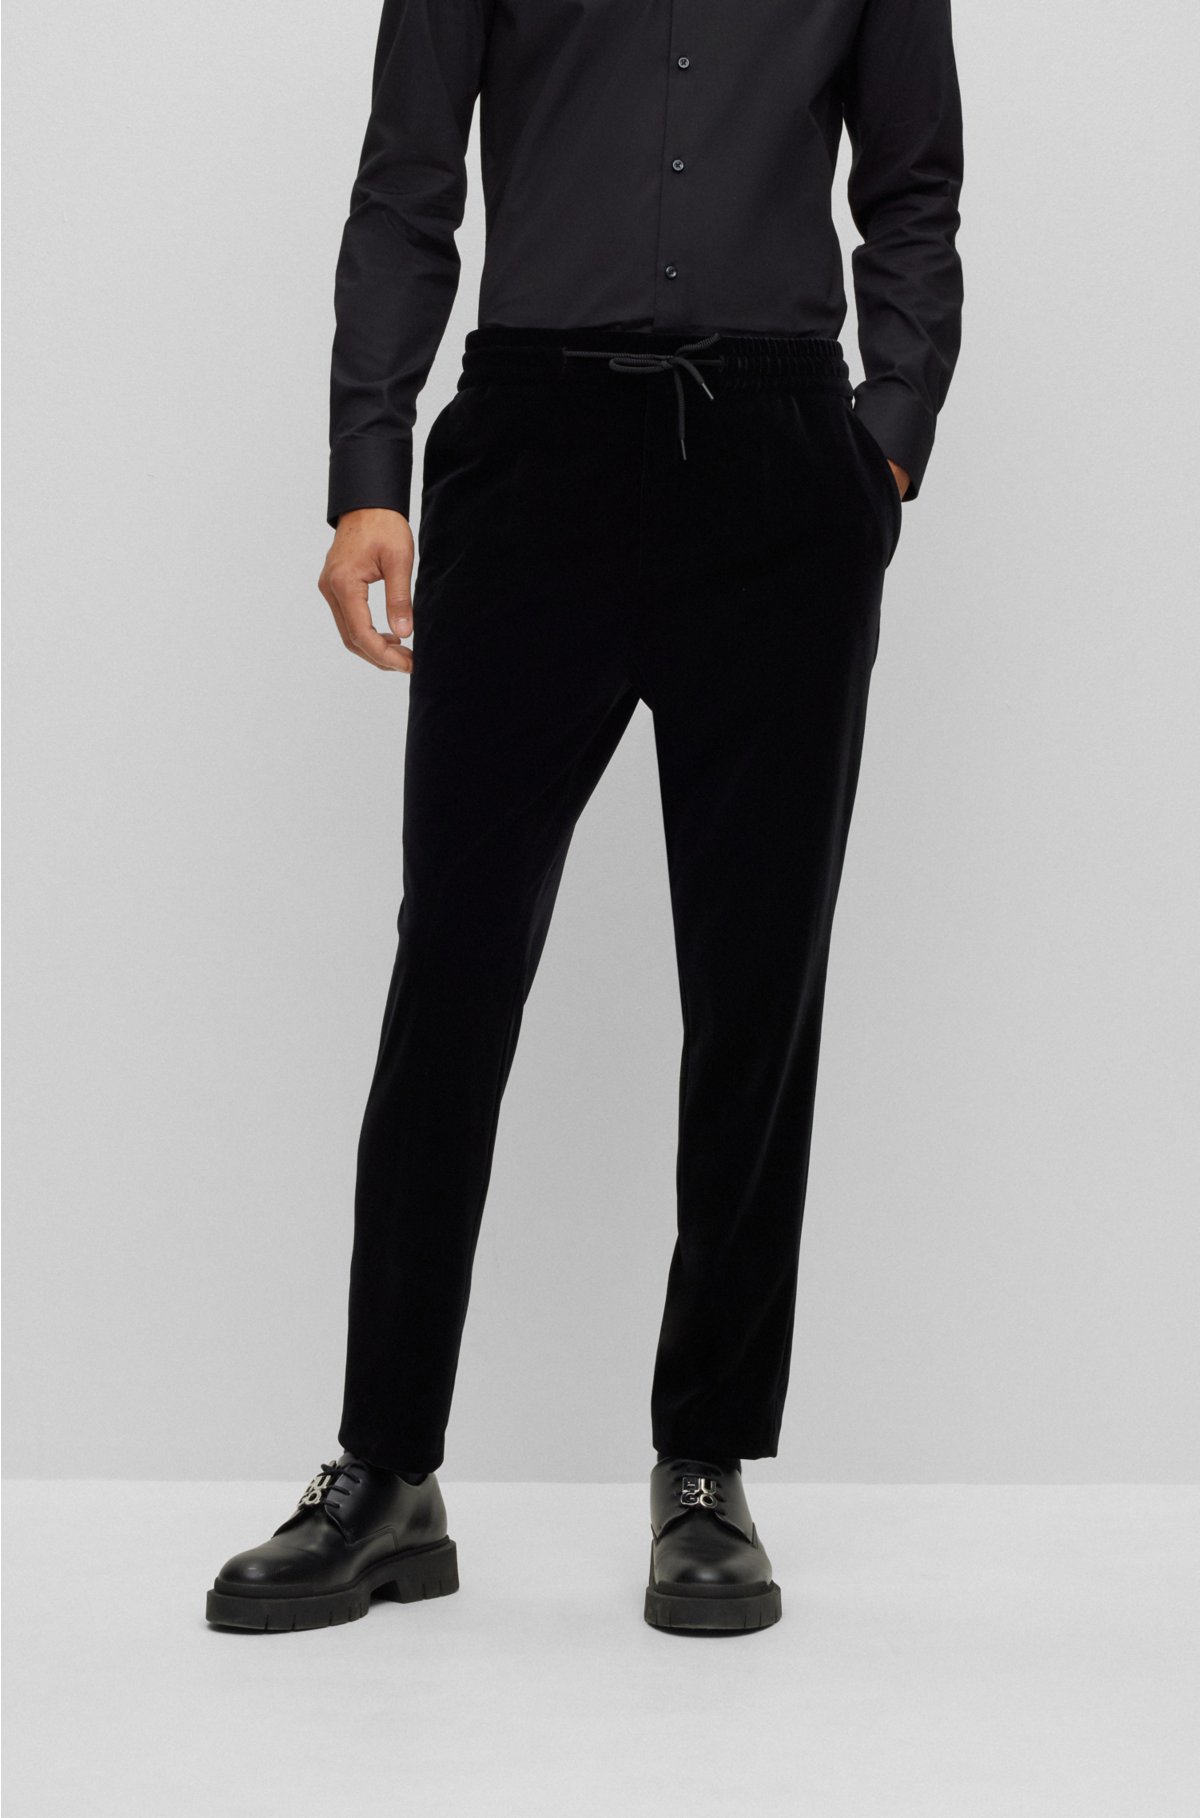 HUGO - Slim-fit trousers in jersey velvet with drawstring waistband